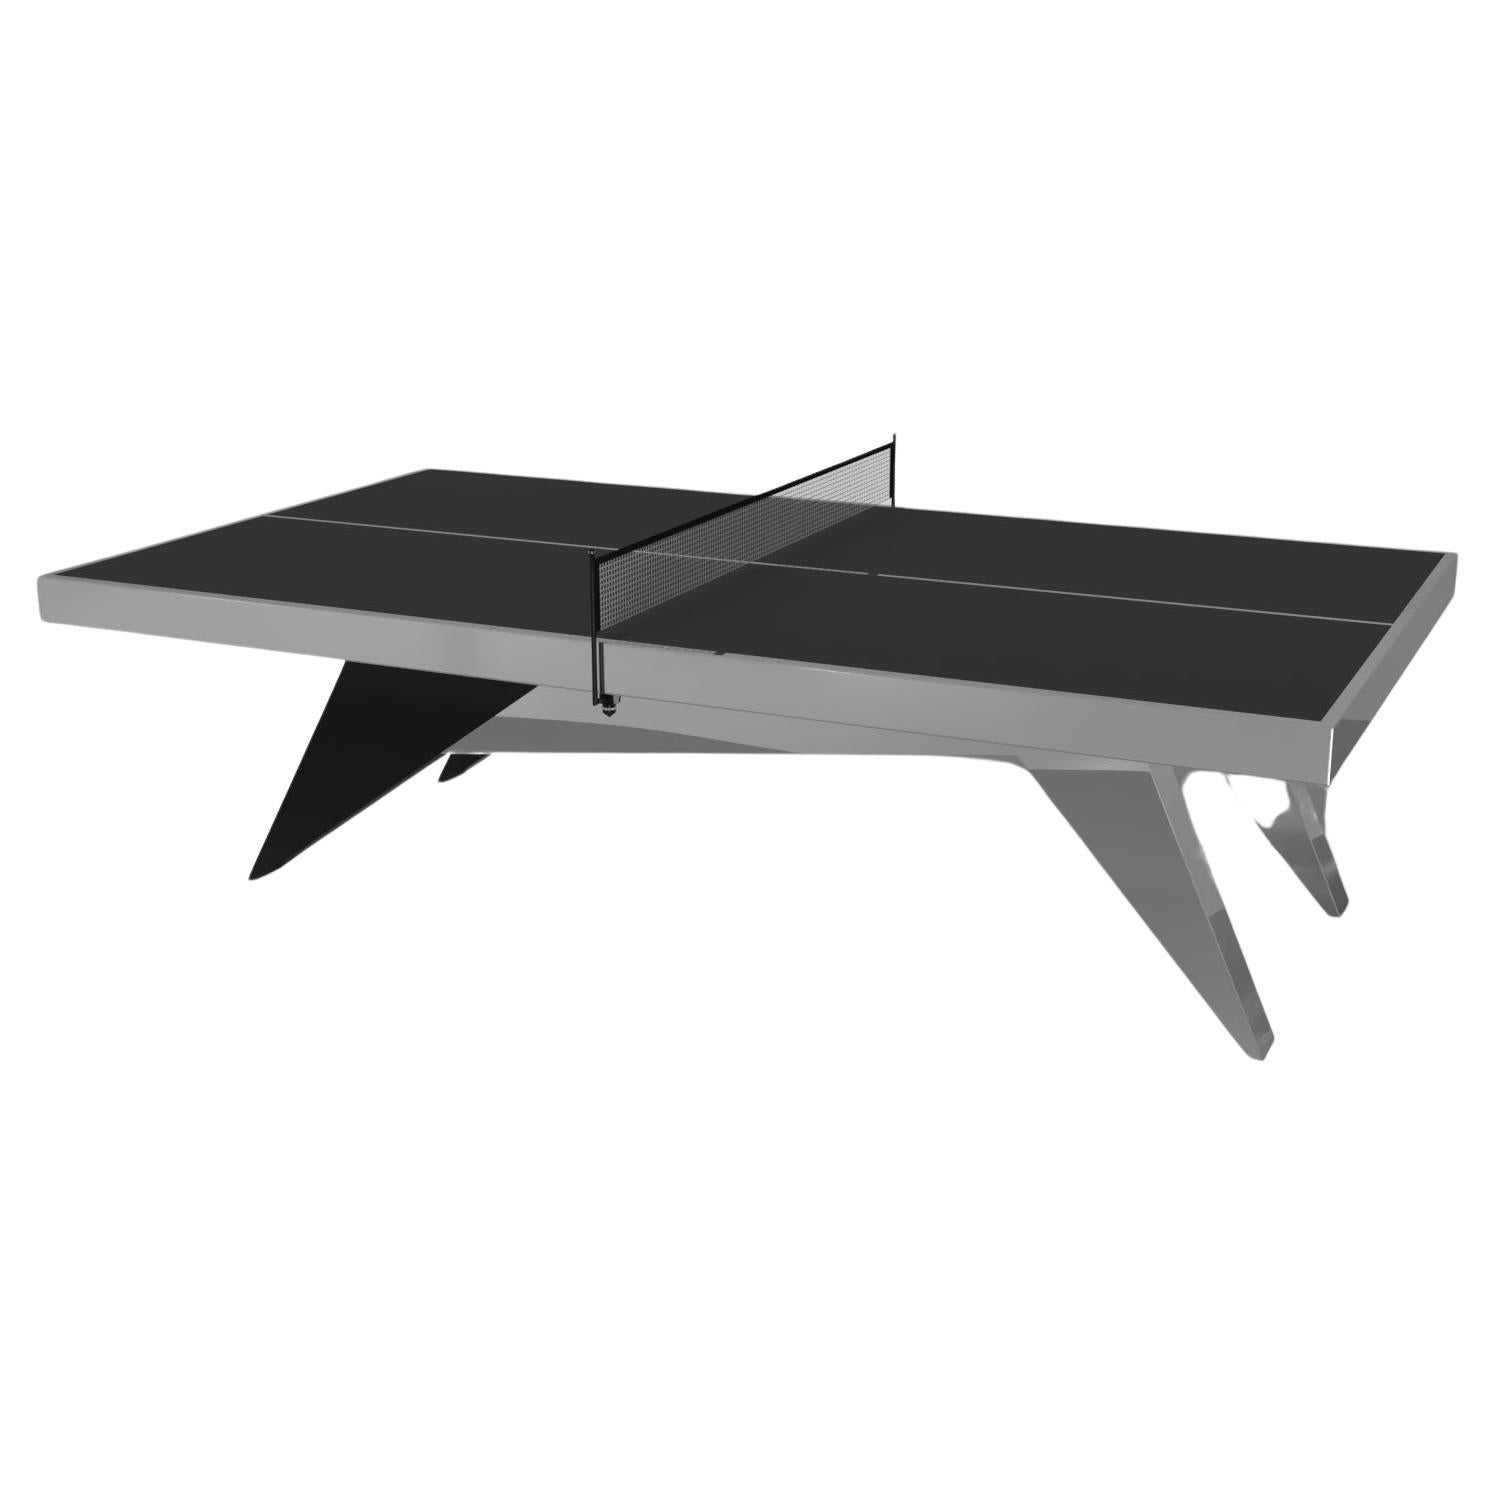 Elevate Customs Mantis Tennis Table / Stainless Steel Metal in 9' - Made in USA For Sale